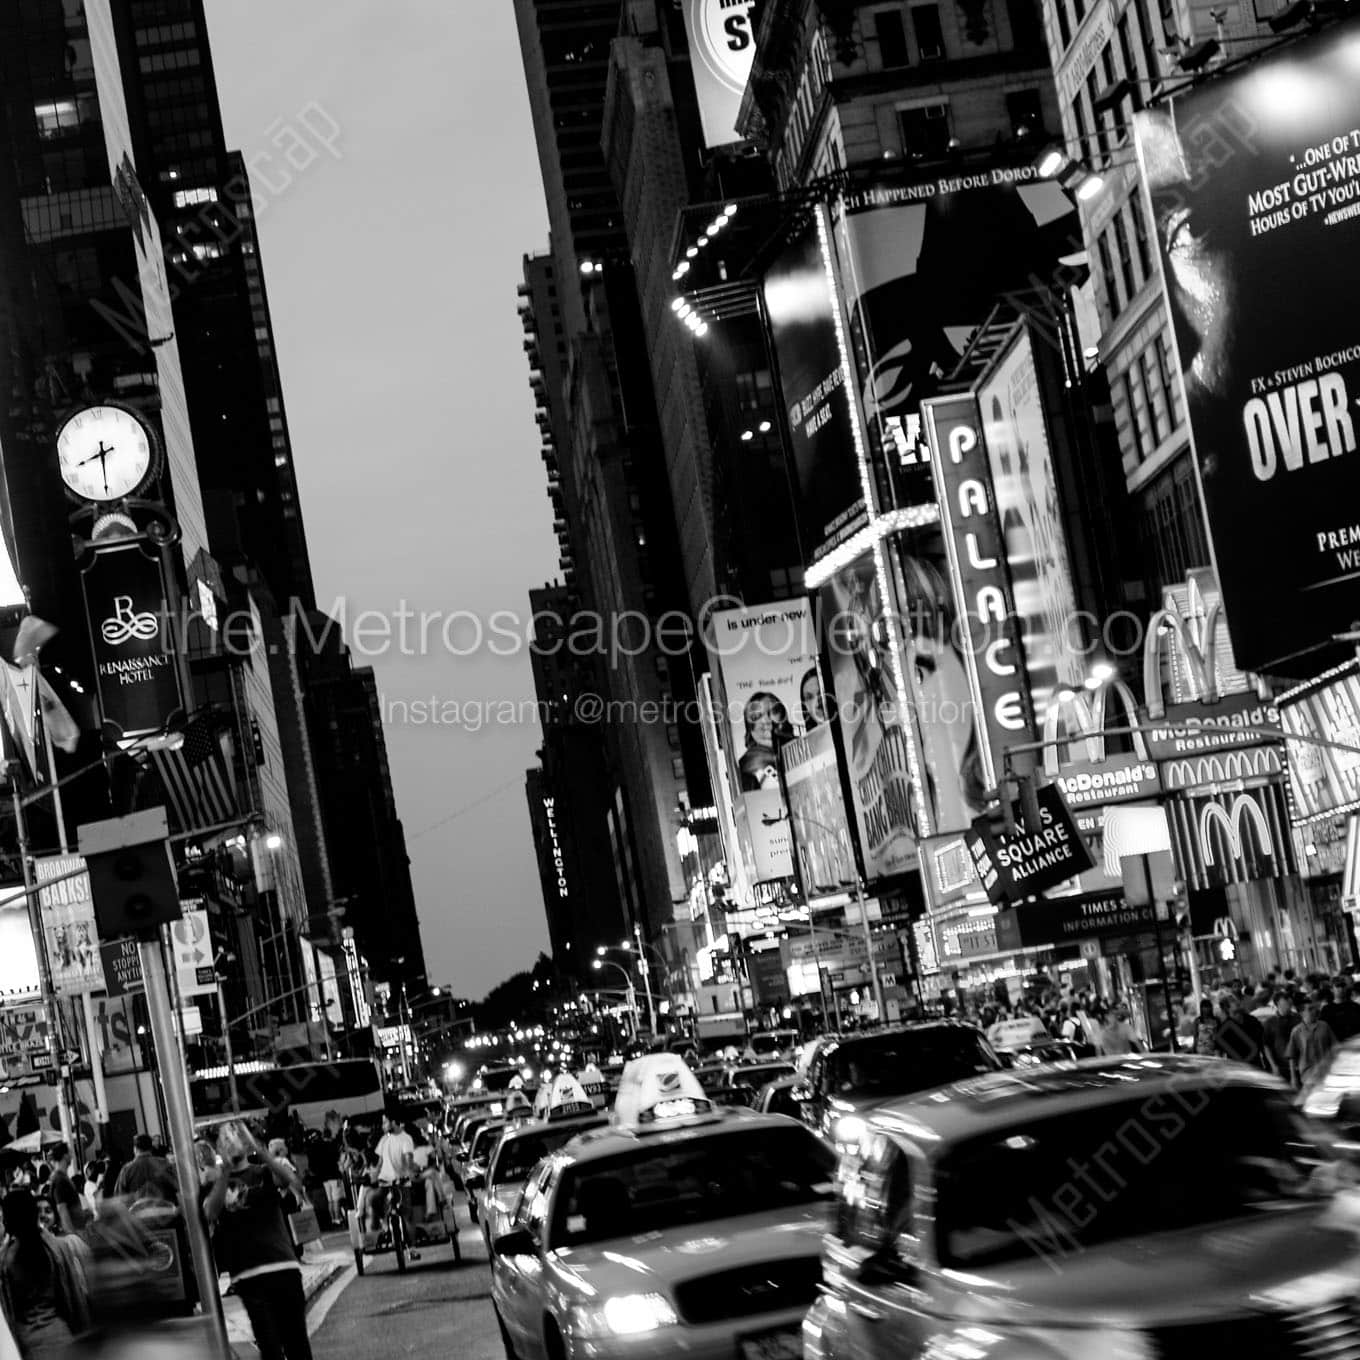 taxi cabs in times square Black & White Office Art